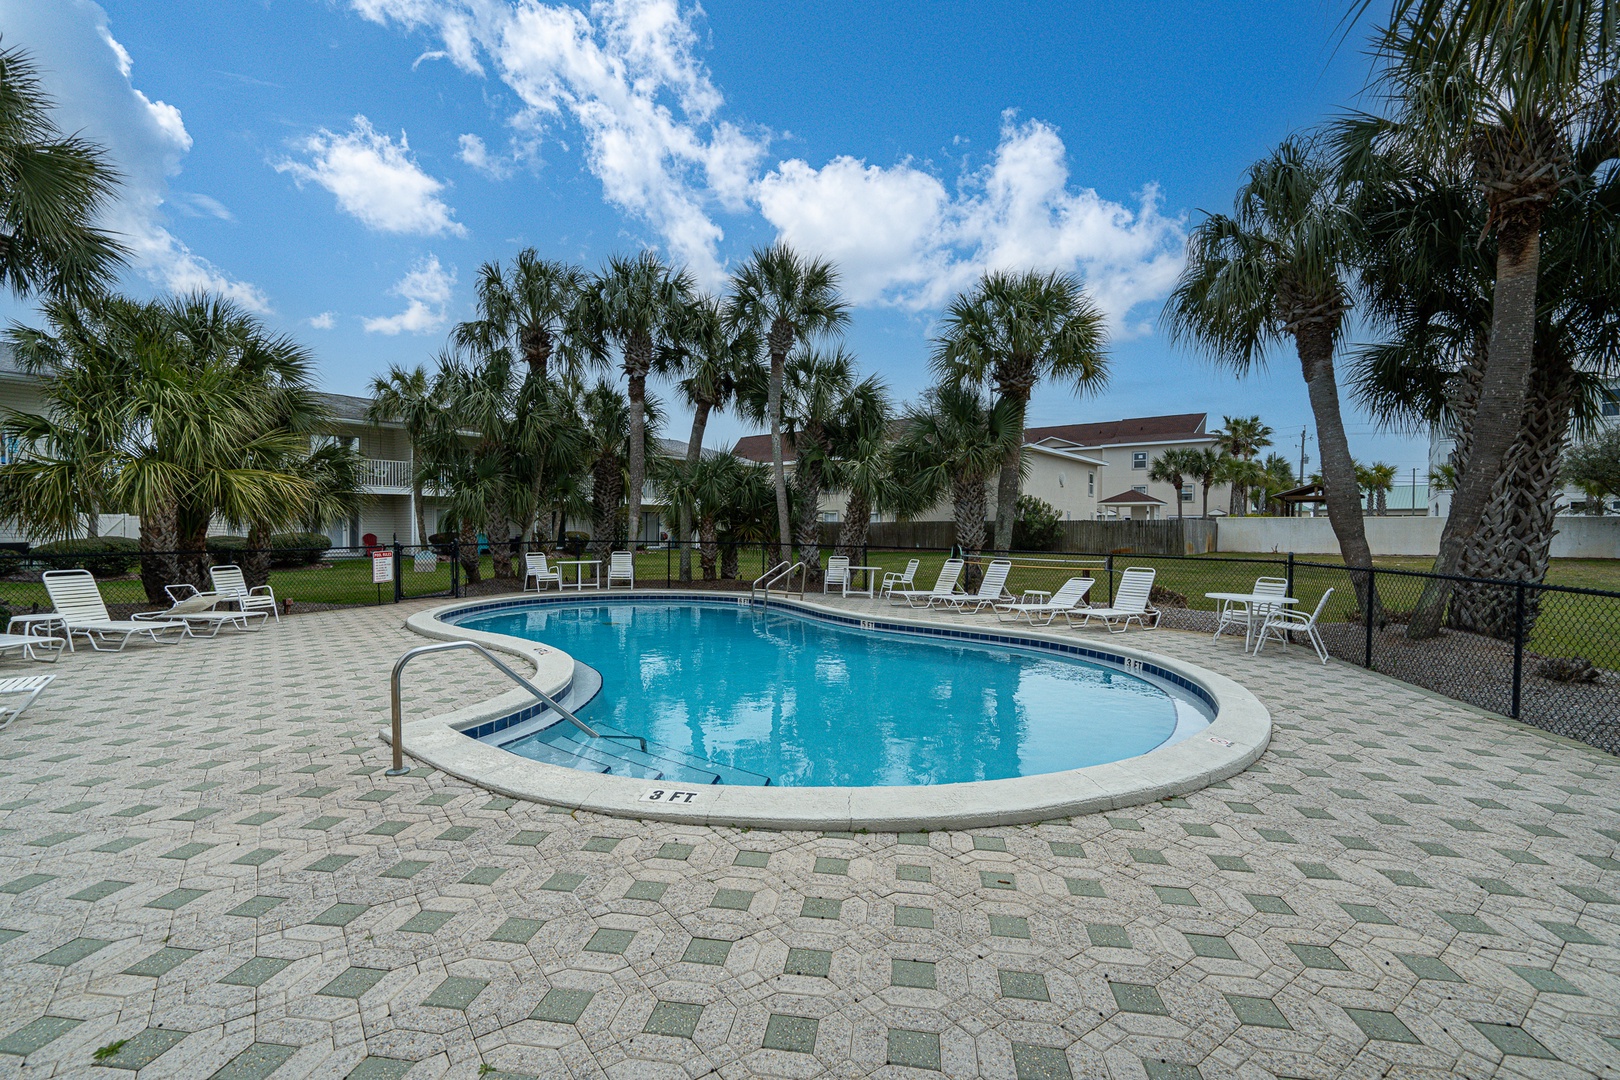 Poolside serenity is just a short walk away!